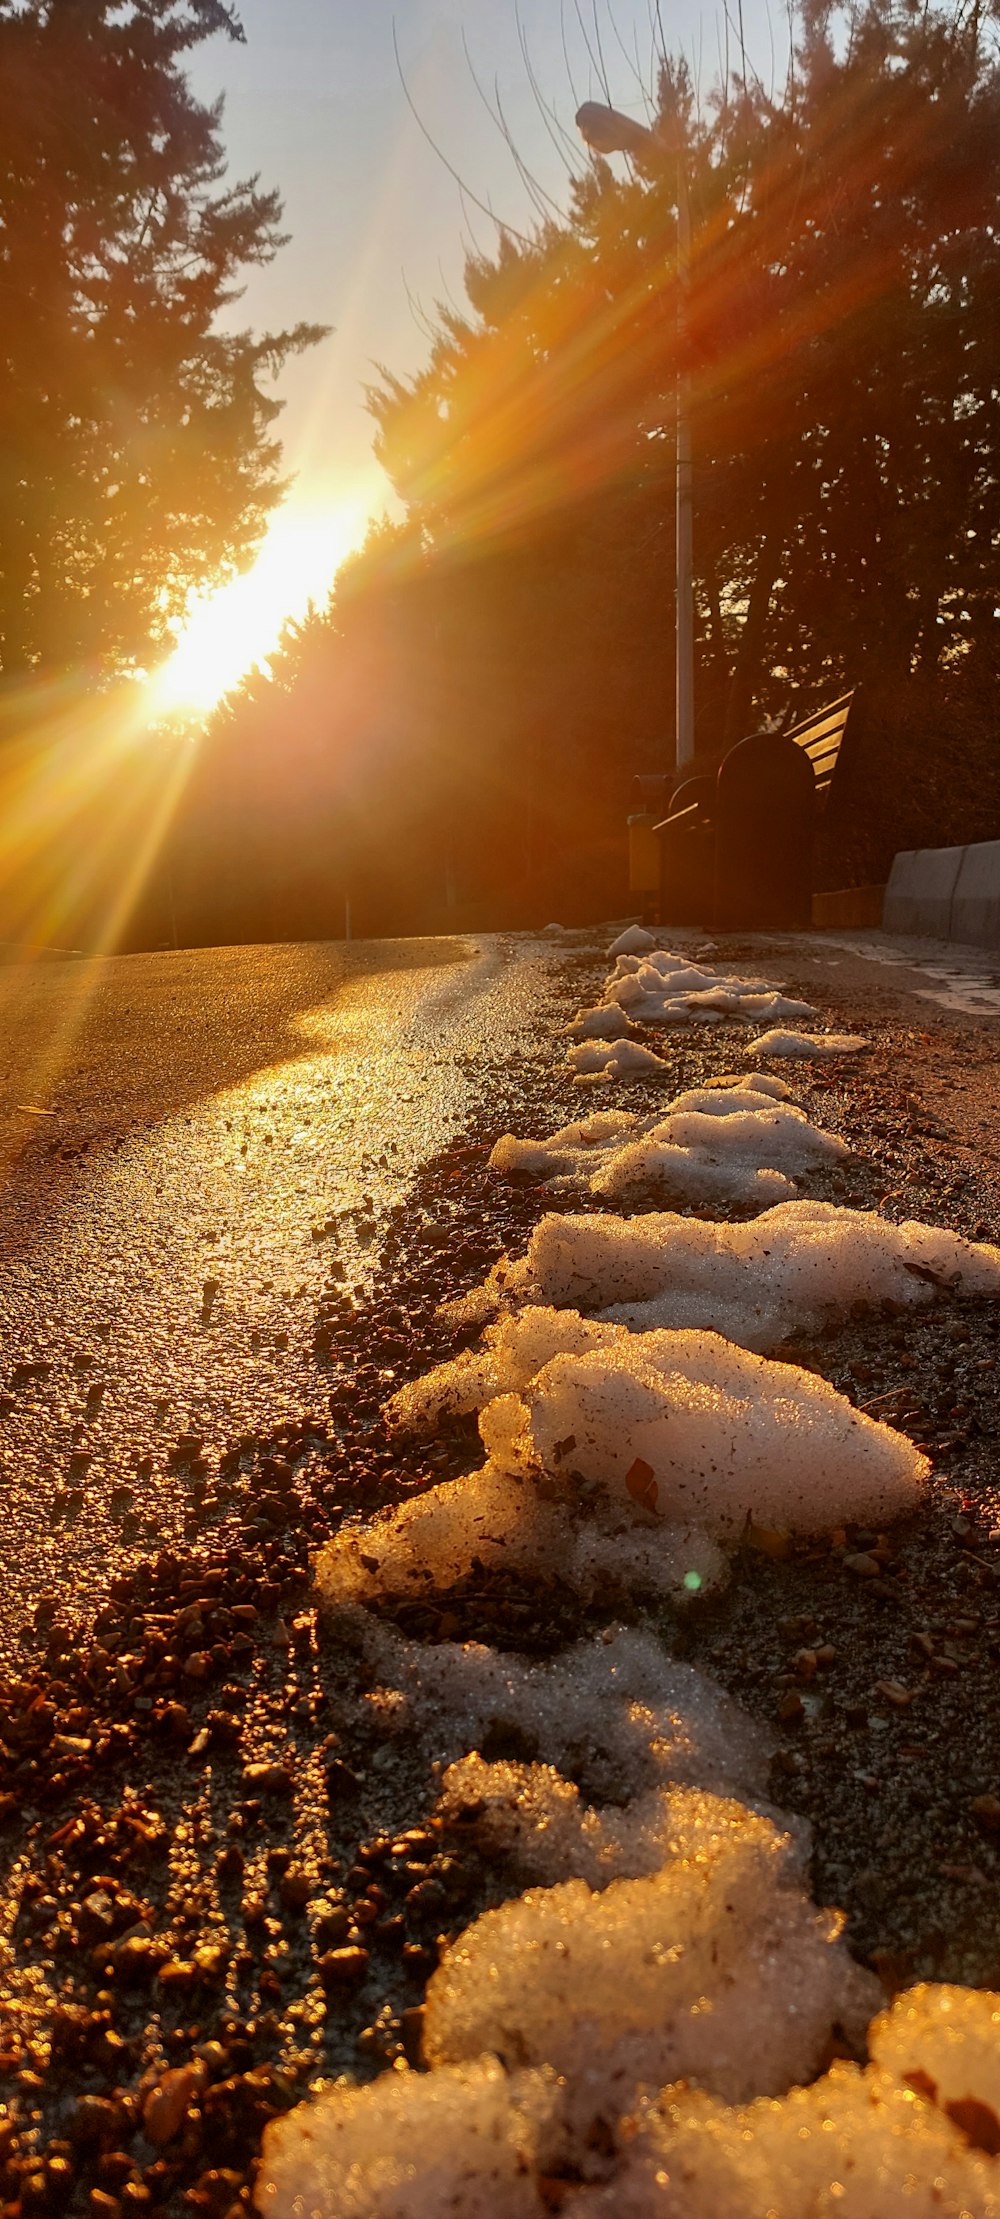 the sun is setting over a road with snow on it